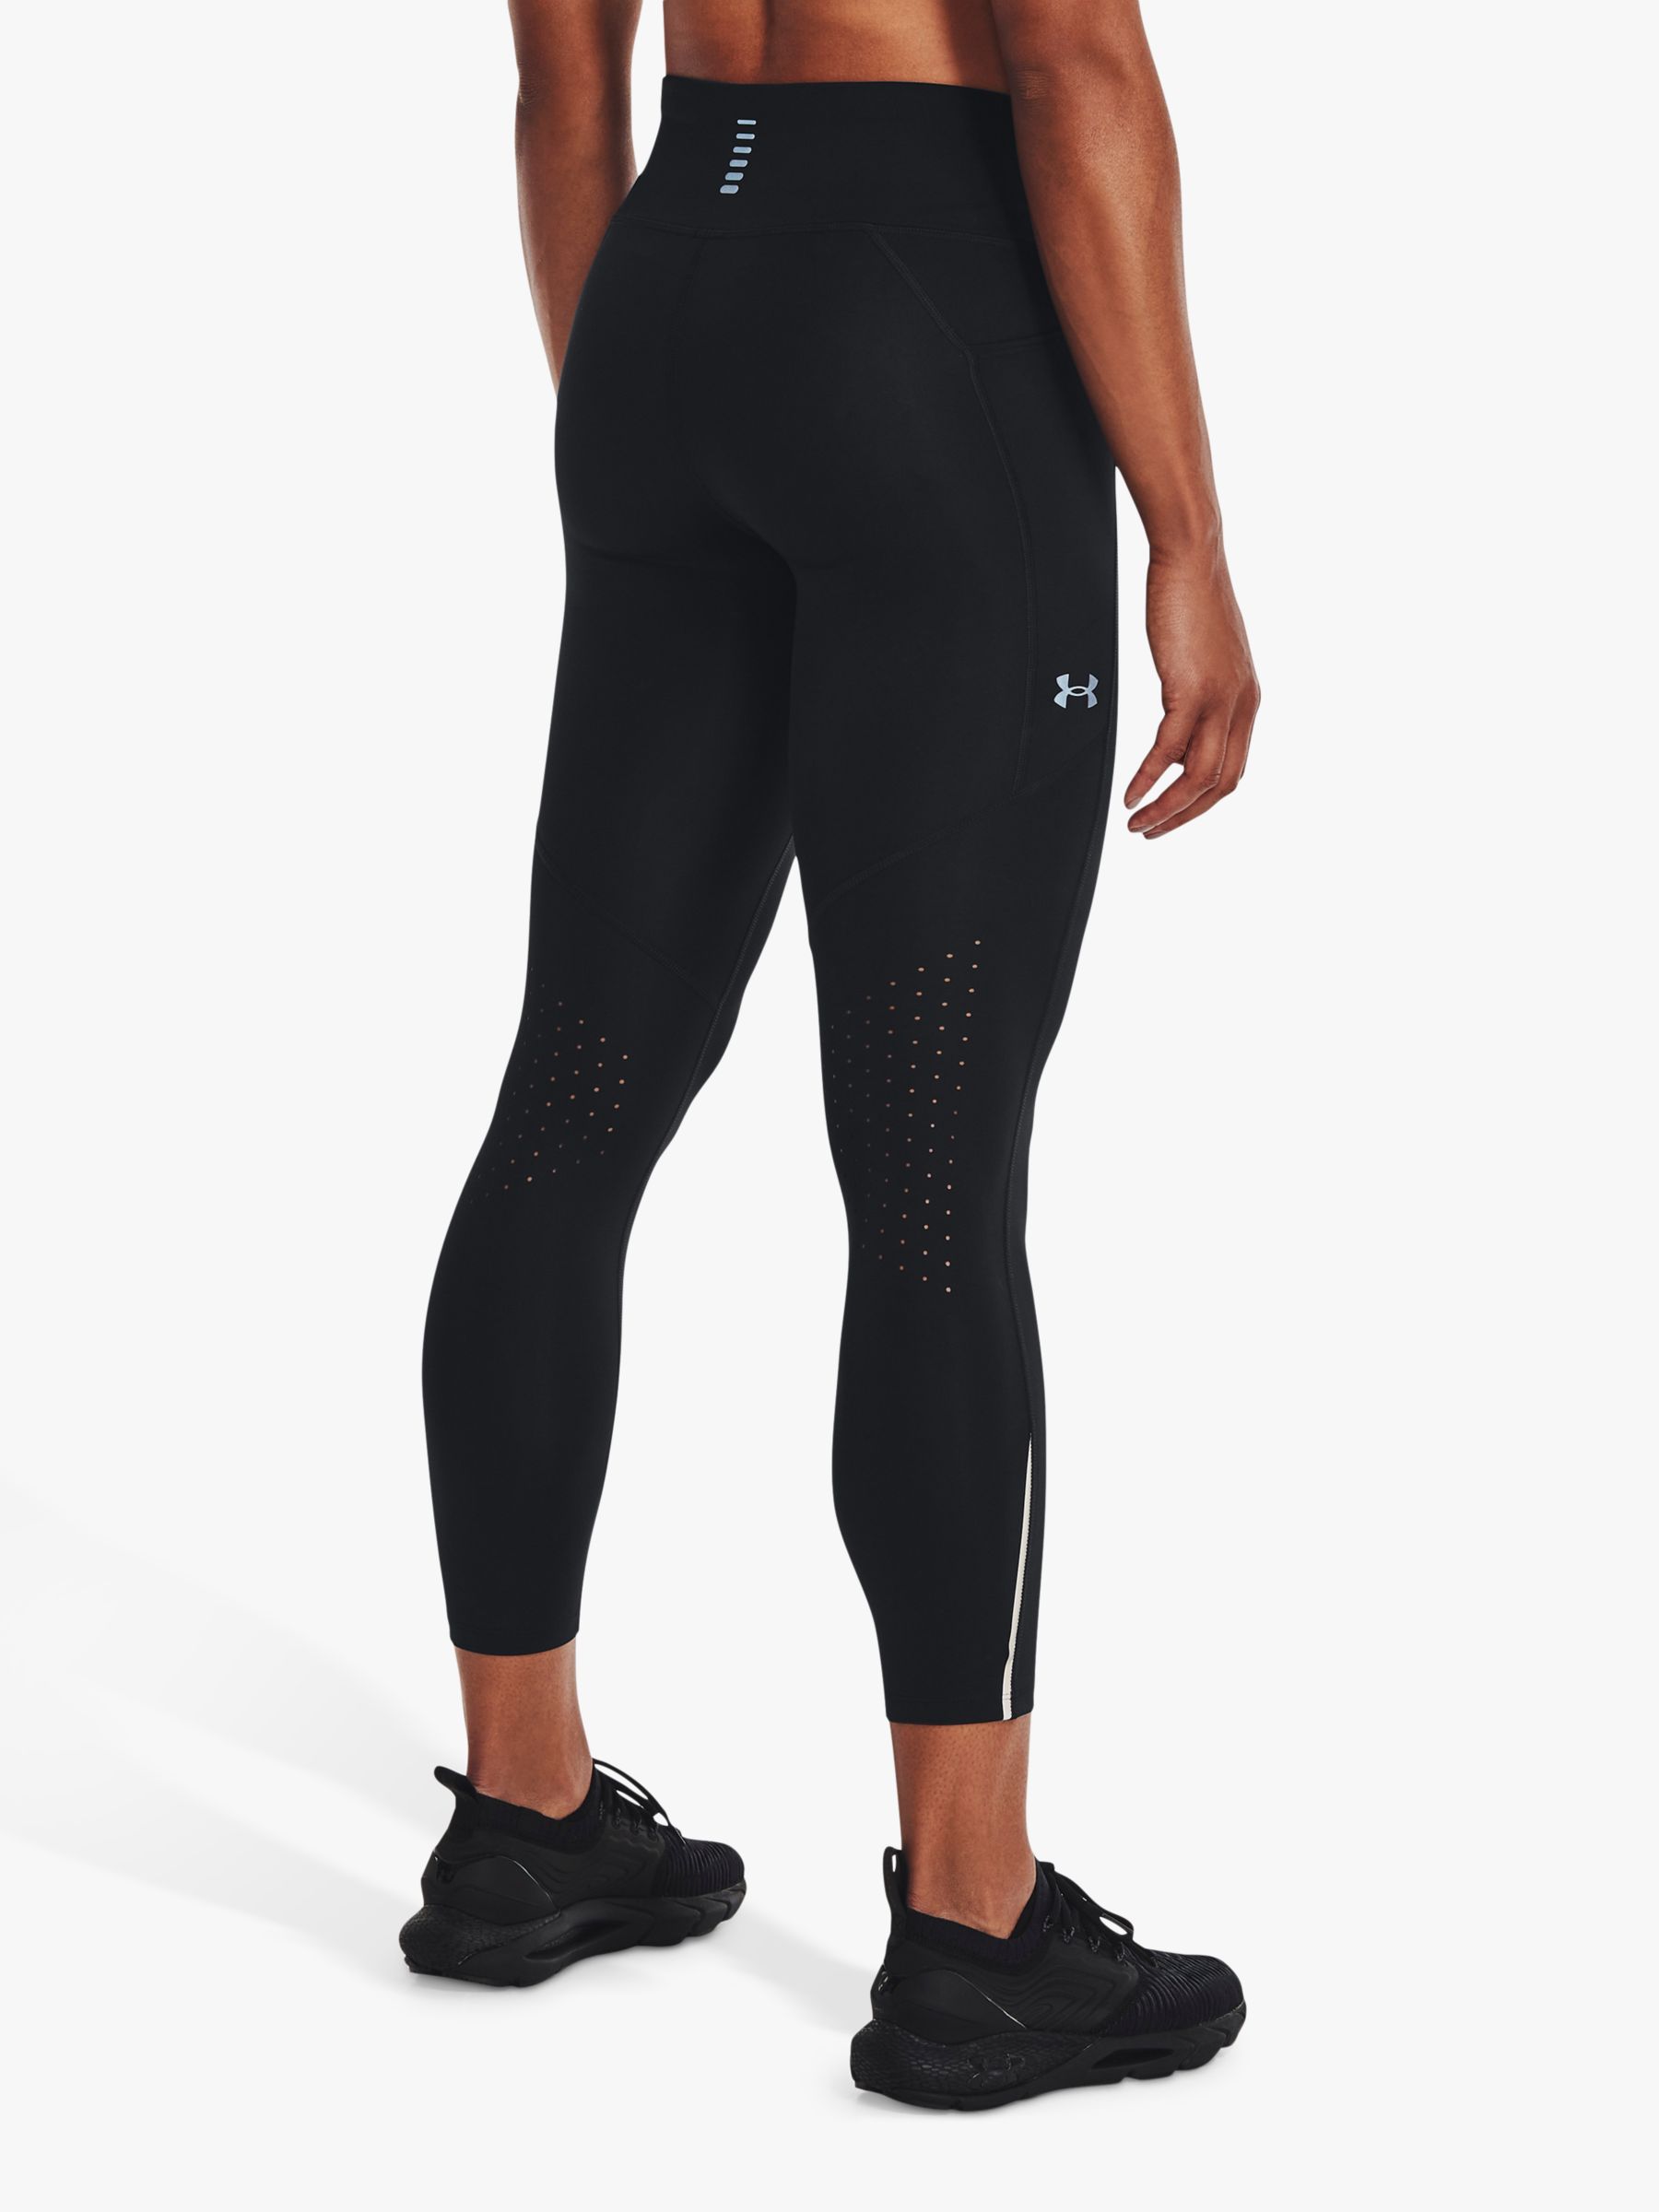 Under Armour Women's UA Armour Fly-Fast Tights XS Black at